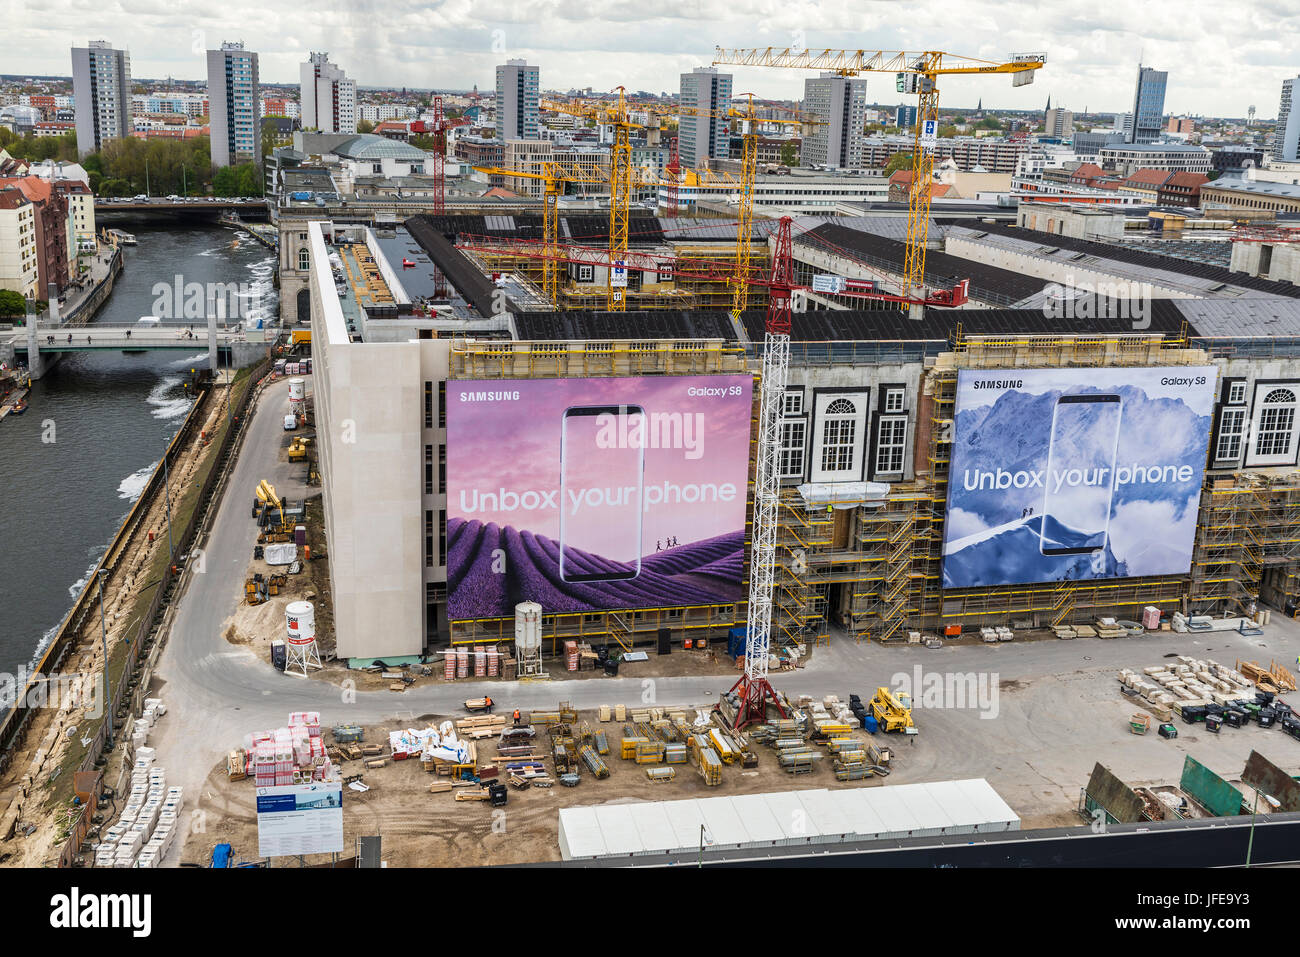 Berlin, Germany - April 13, 2017: Overview of Berlin with many construction cranes and mobile phone ads Samsung Galaxy S8 in Berlin, Germany Stock Photo